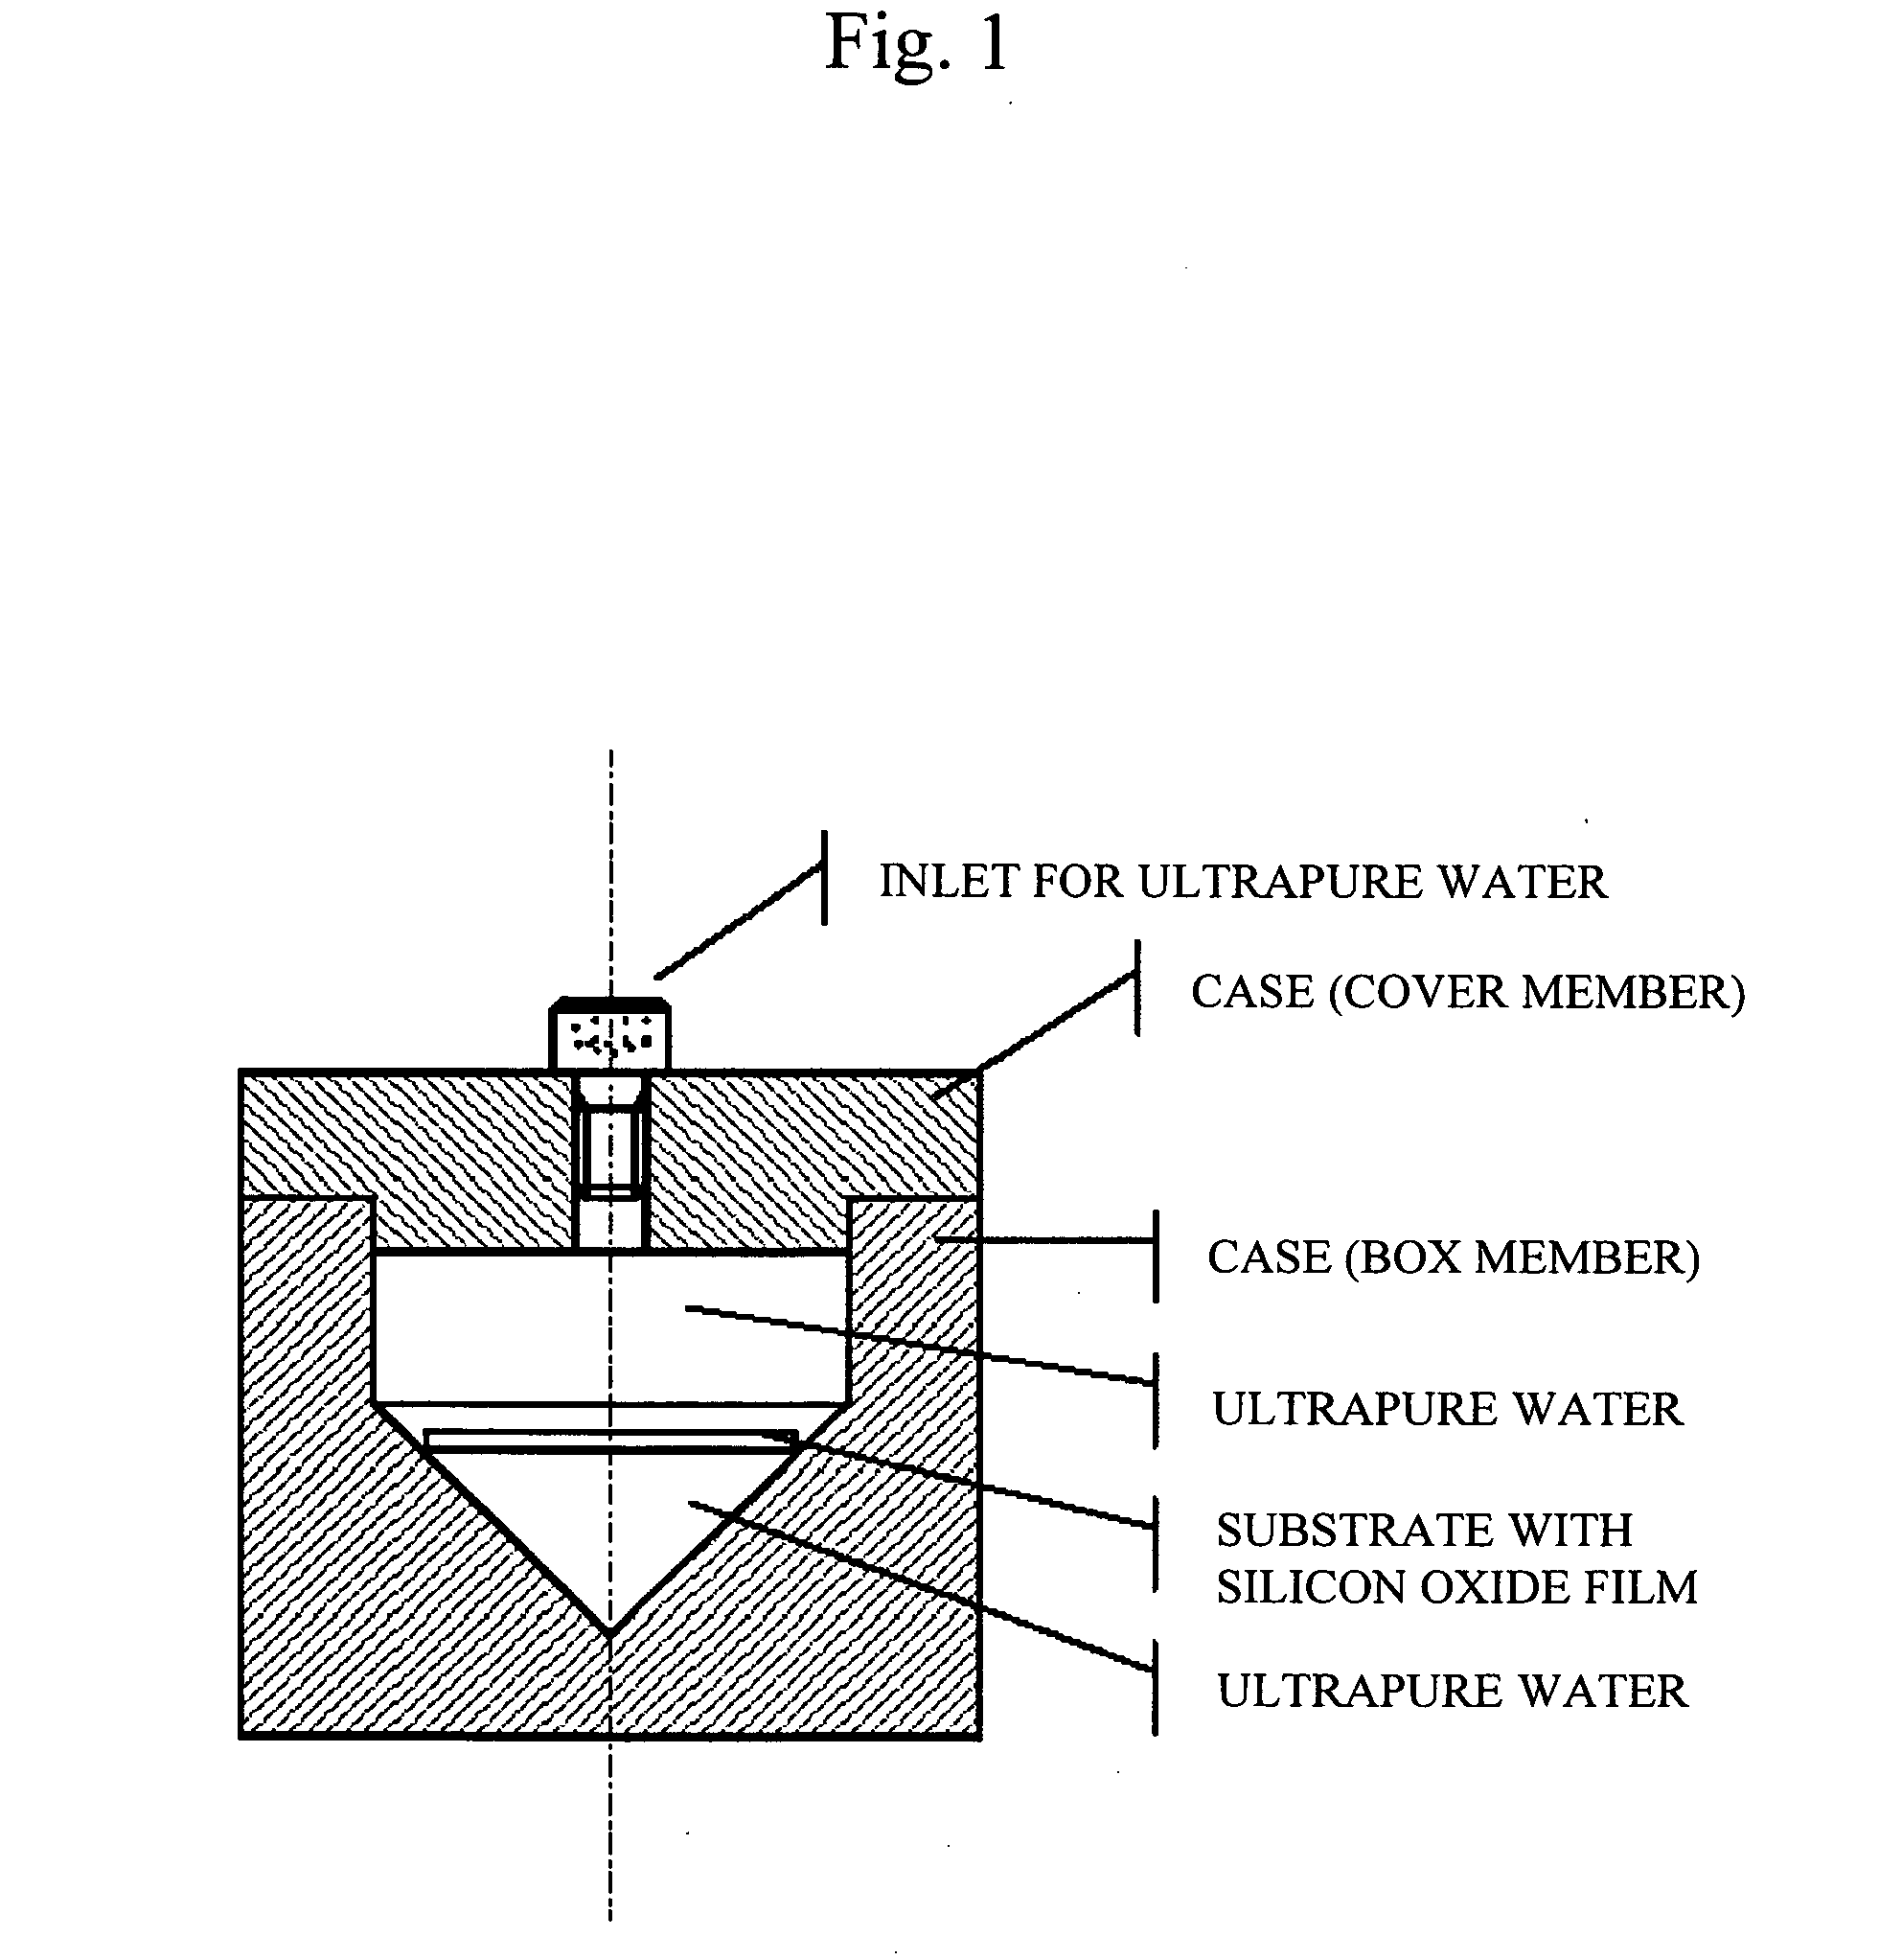 Method for storing silicon substrate having silicon oxide film formed thereon